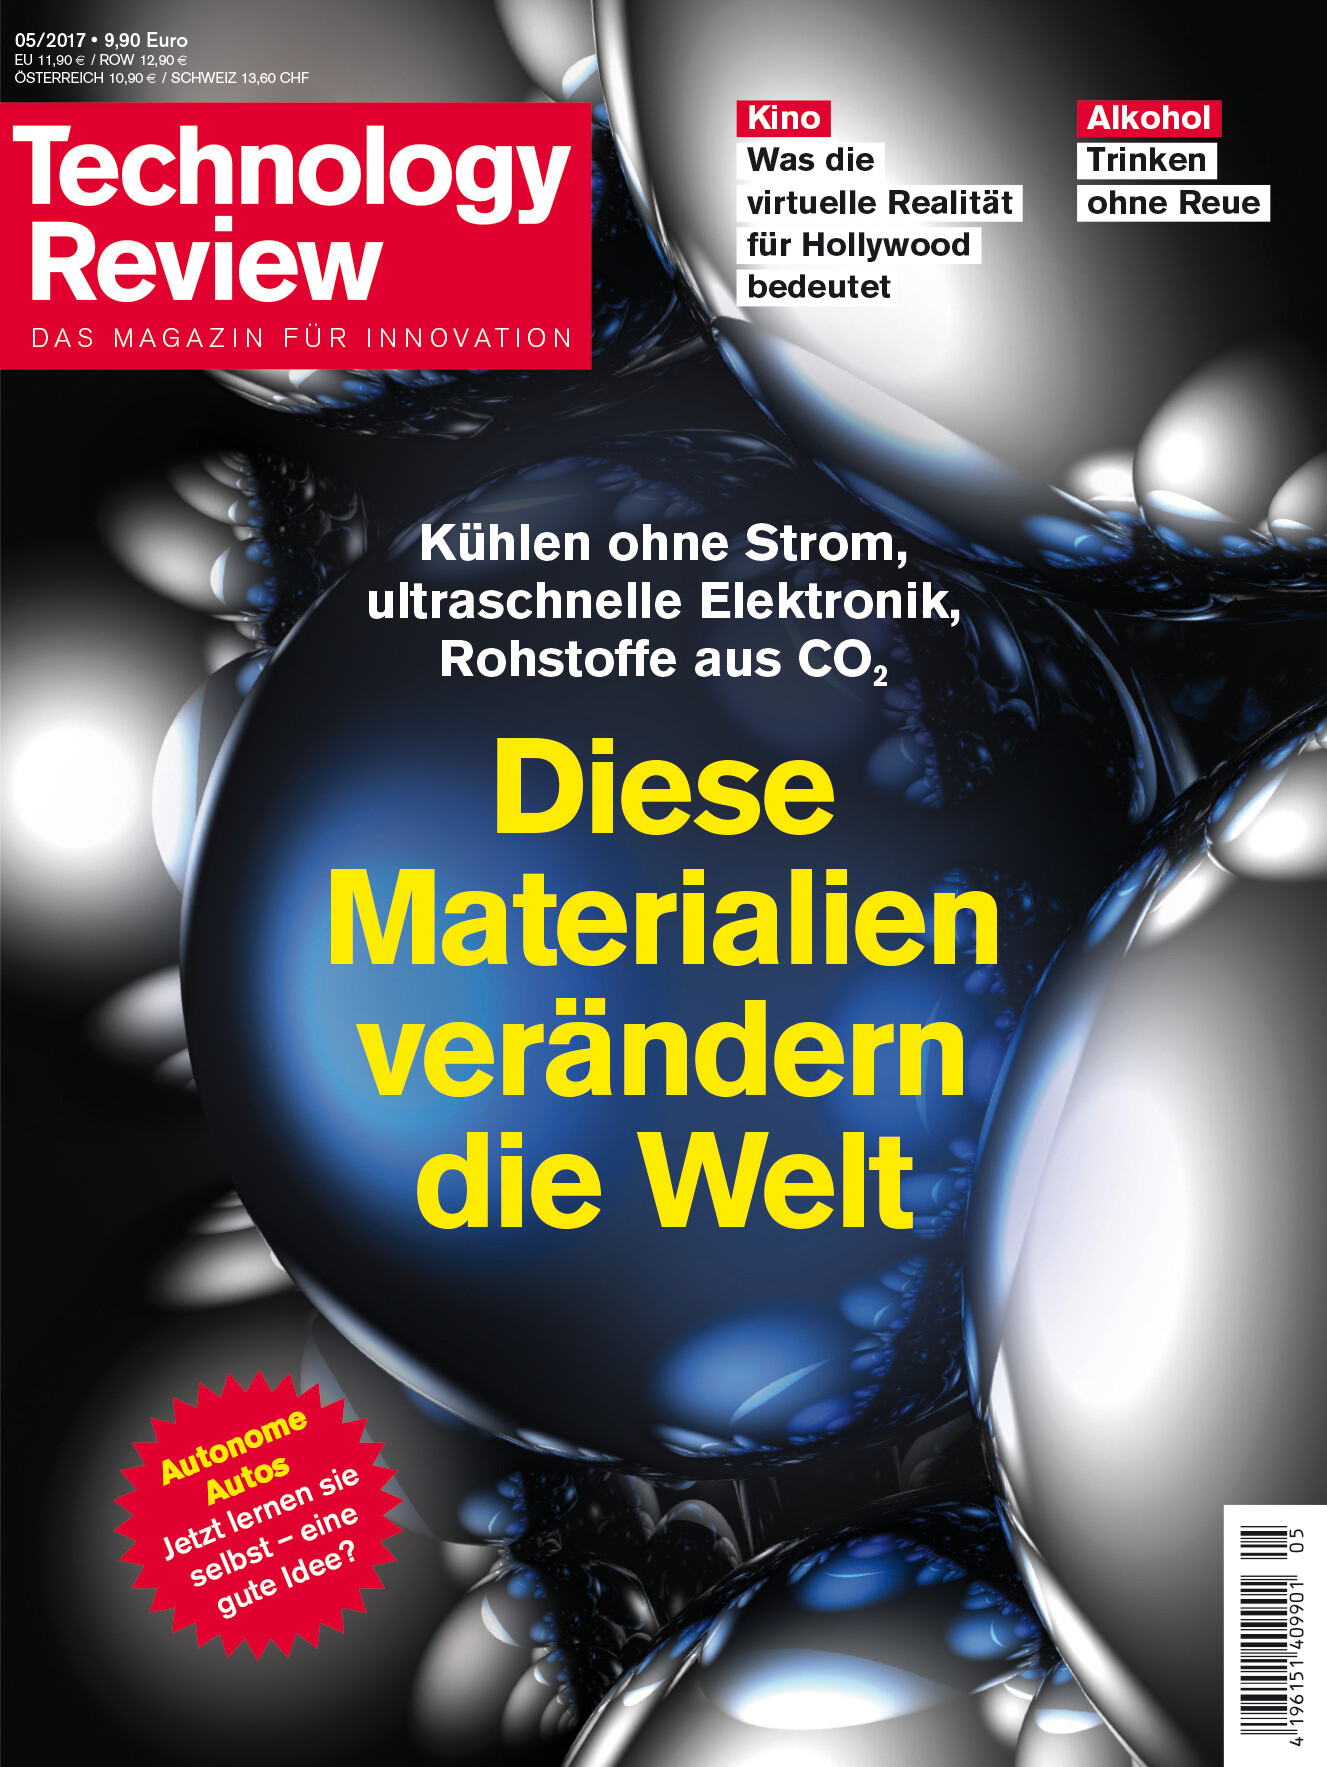 Technology Review 5/2017